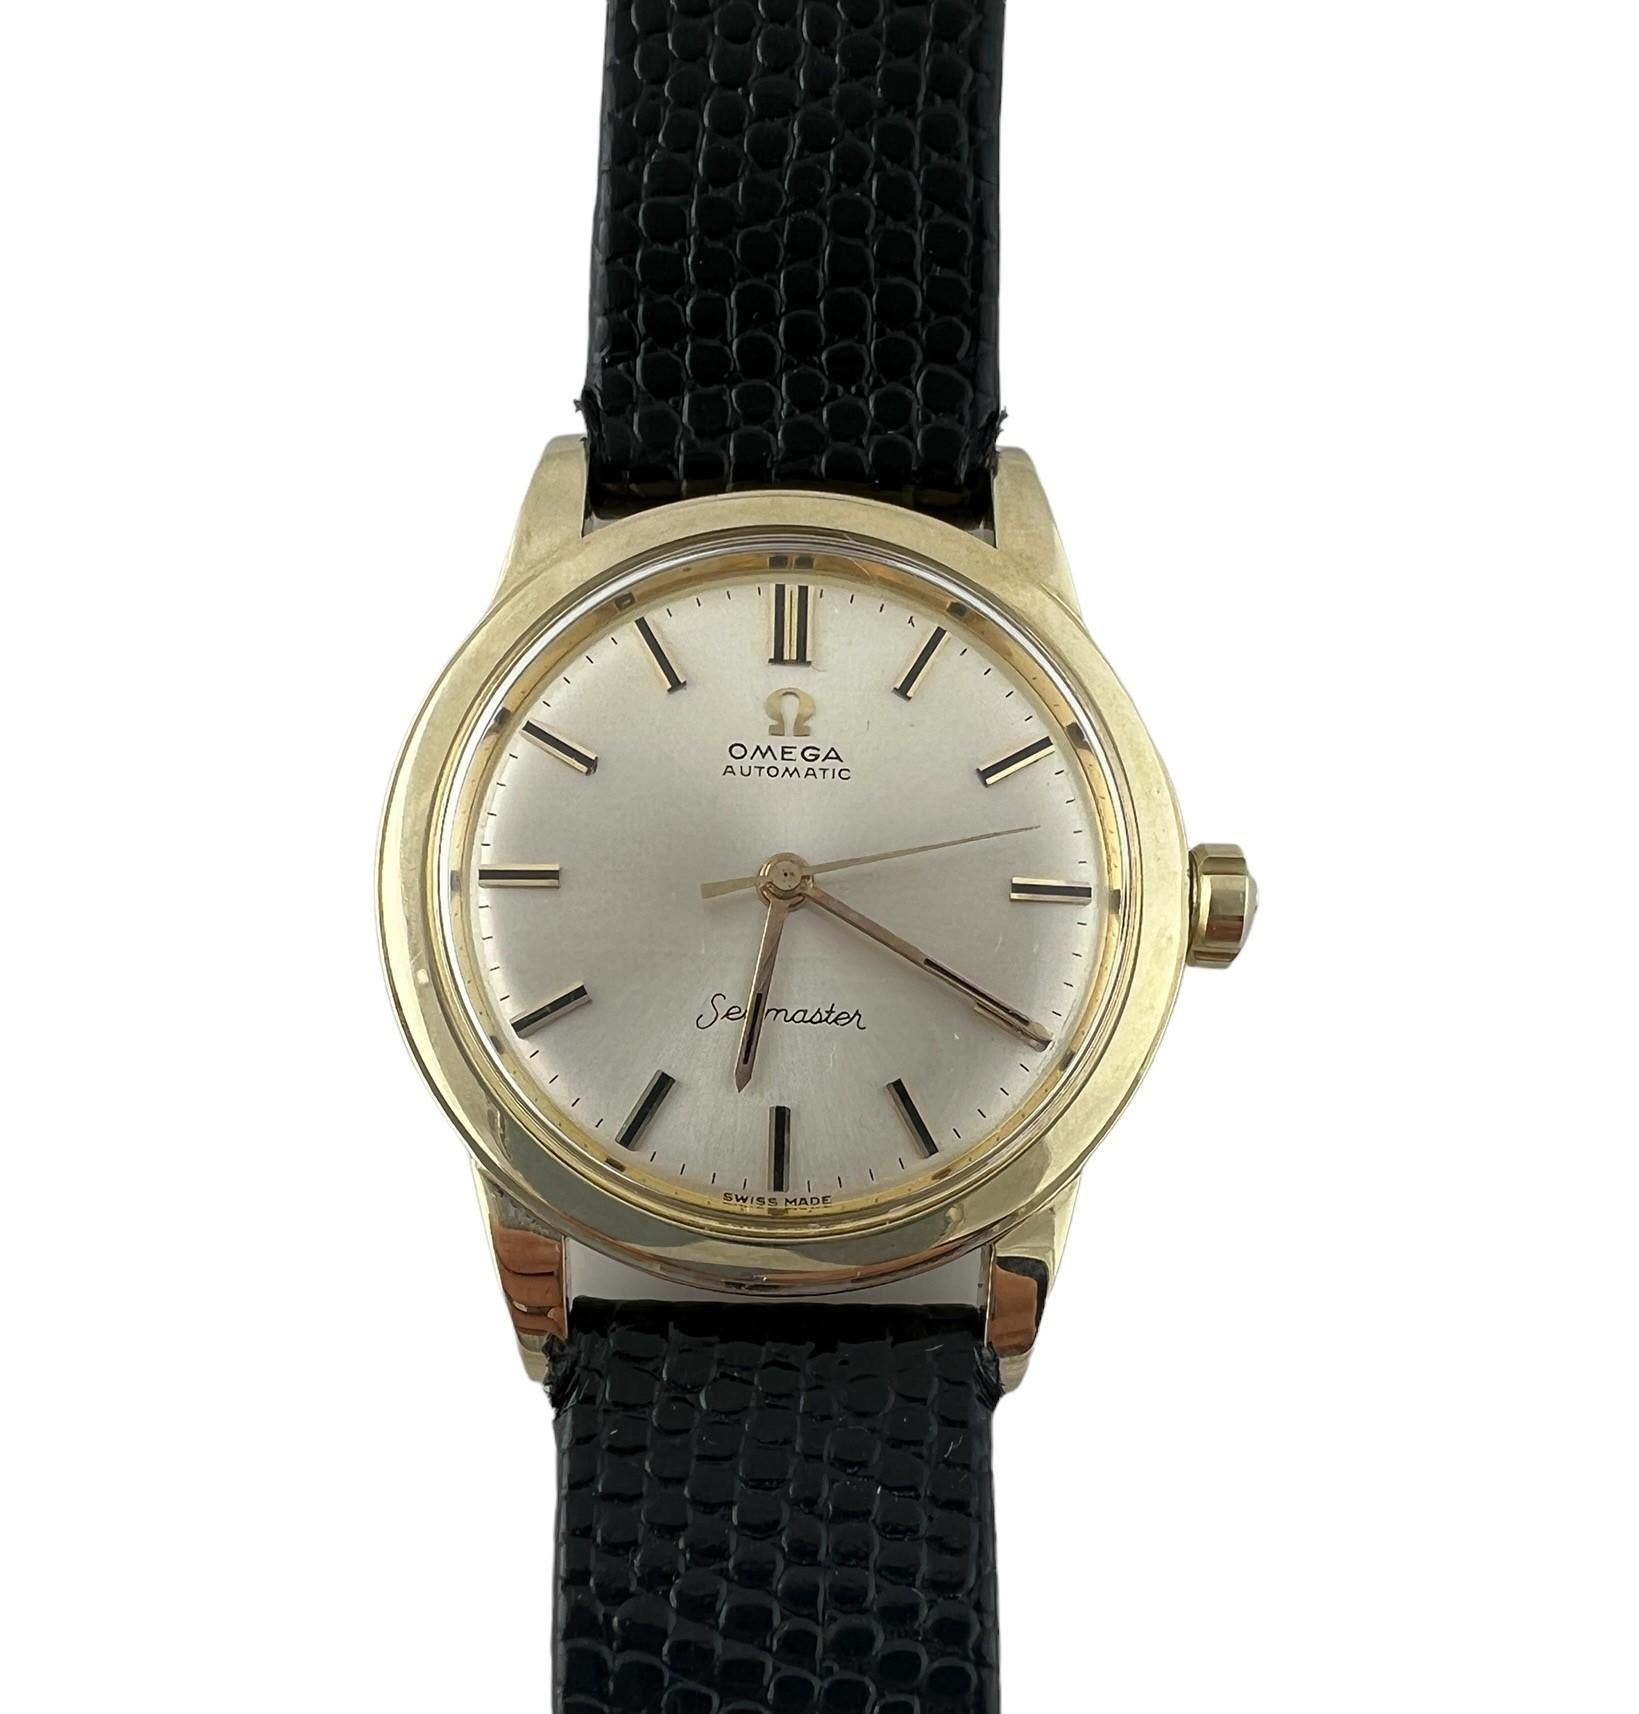 Omega Seamaster 14K Yellow Gold Men's watch

GX6546
E71533

This Omega Seamaster is from the 1950's and is set in 14K Yellow gold

Case is 34.5mm and engraved on back: 